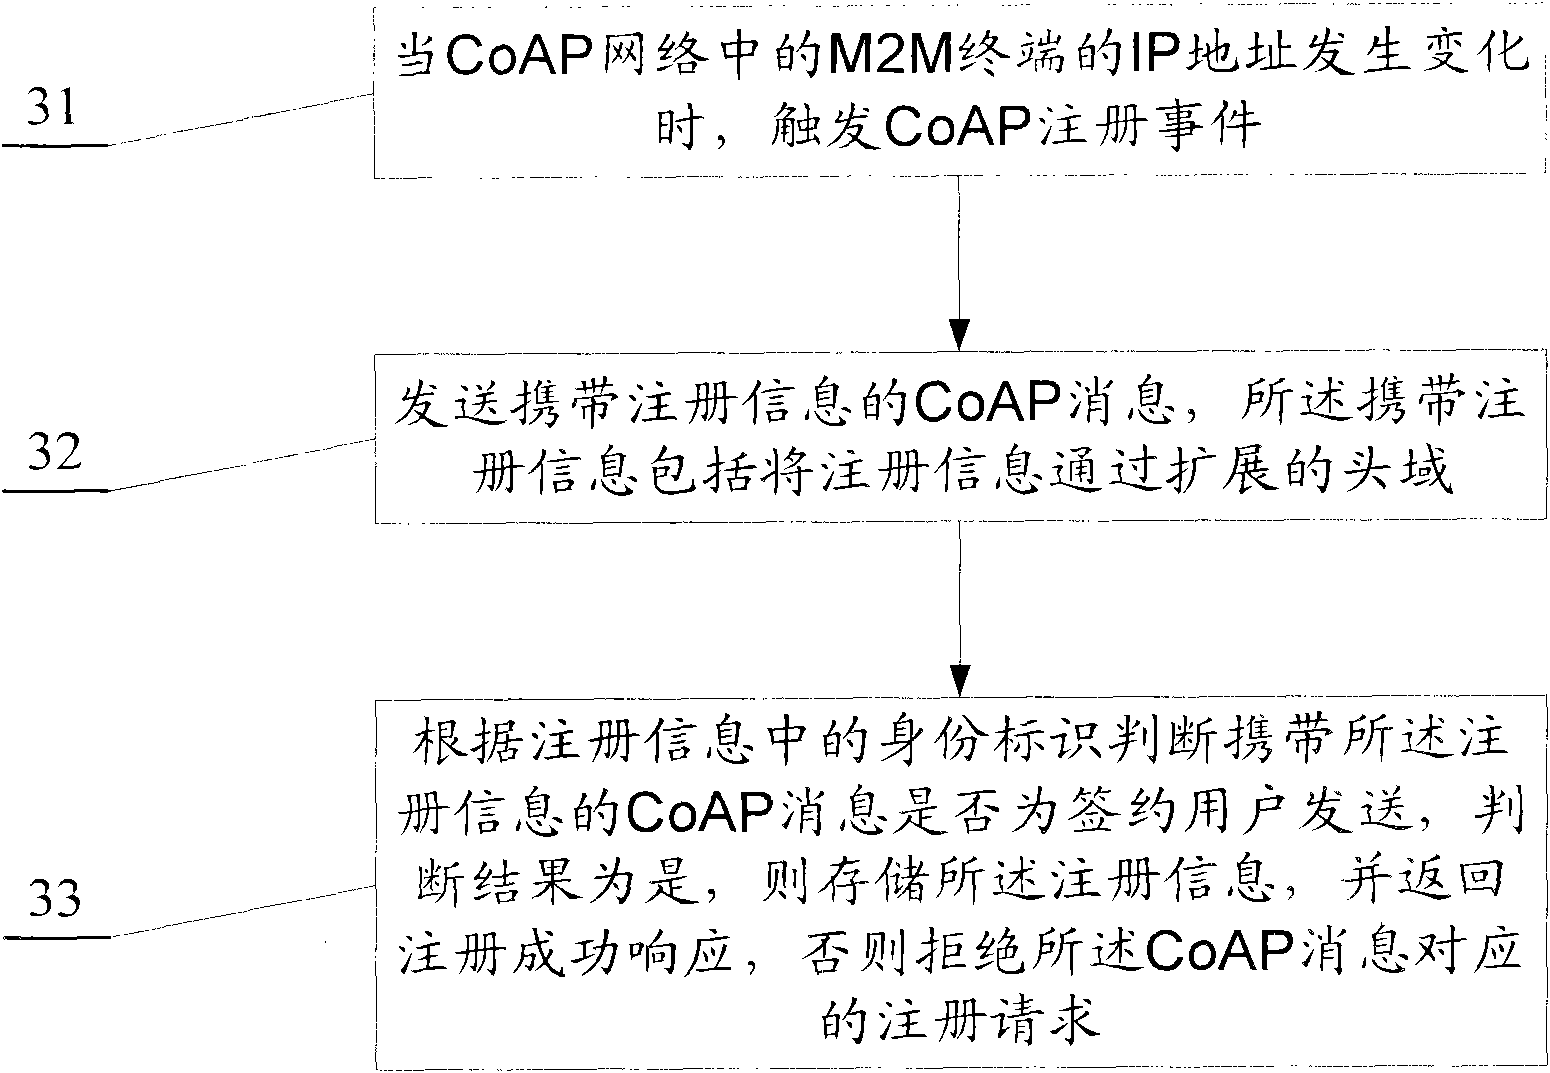 Method and device for registering in CoAP network